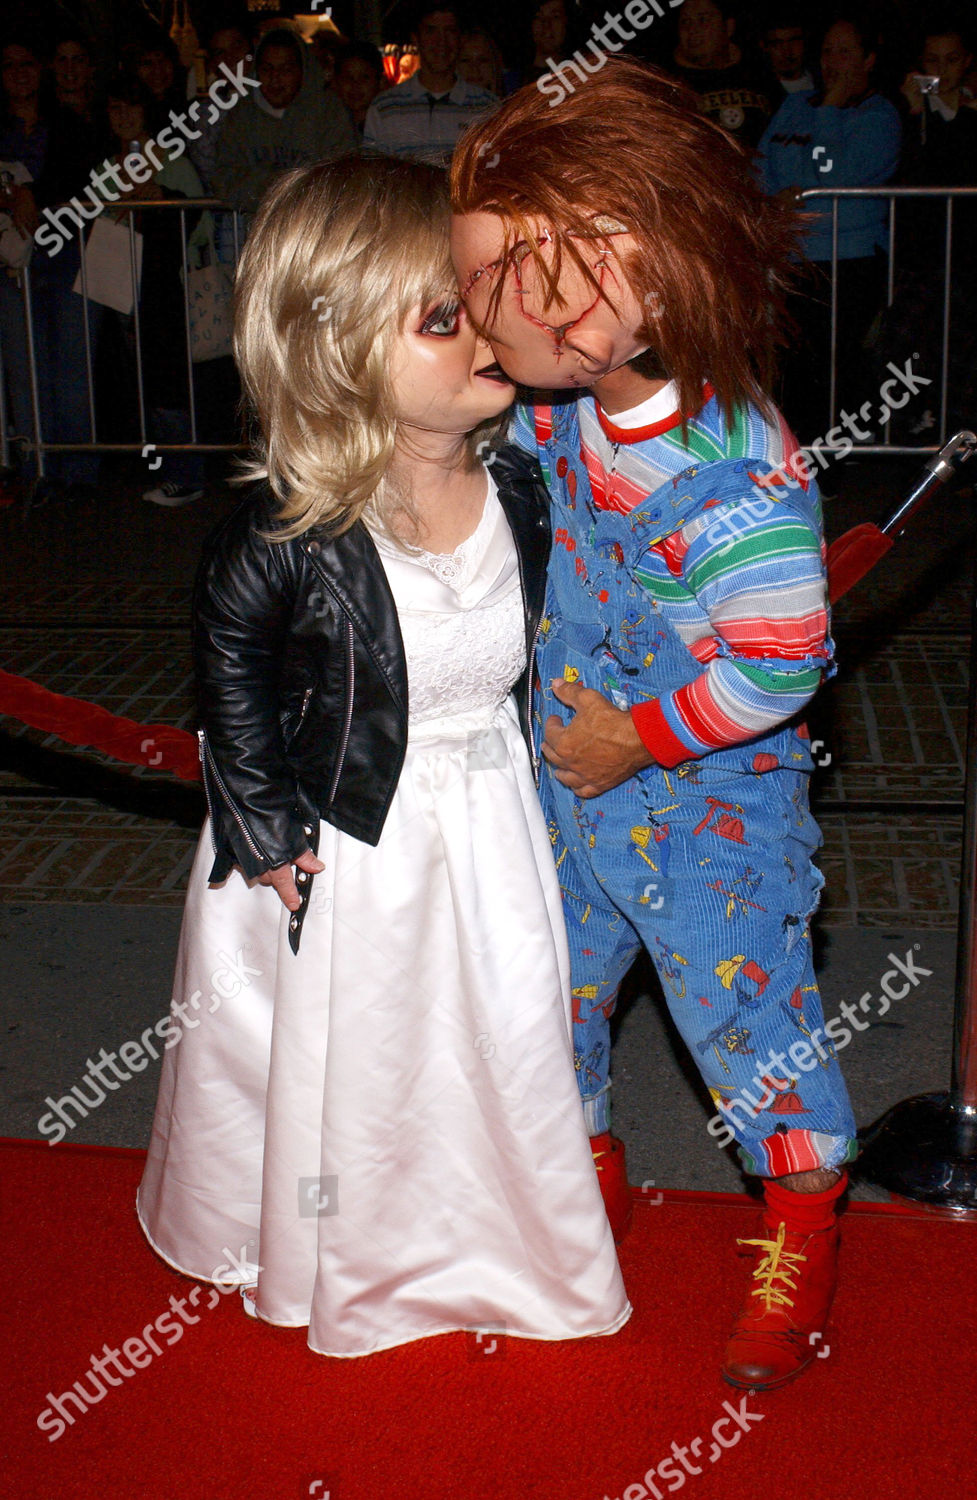 chucky and his bride kiss